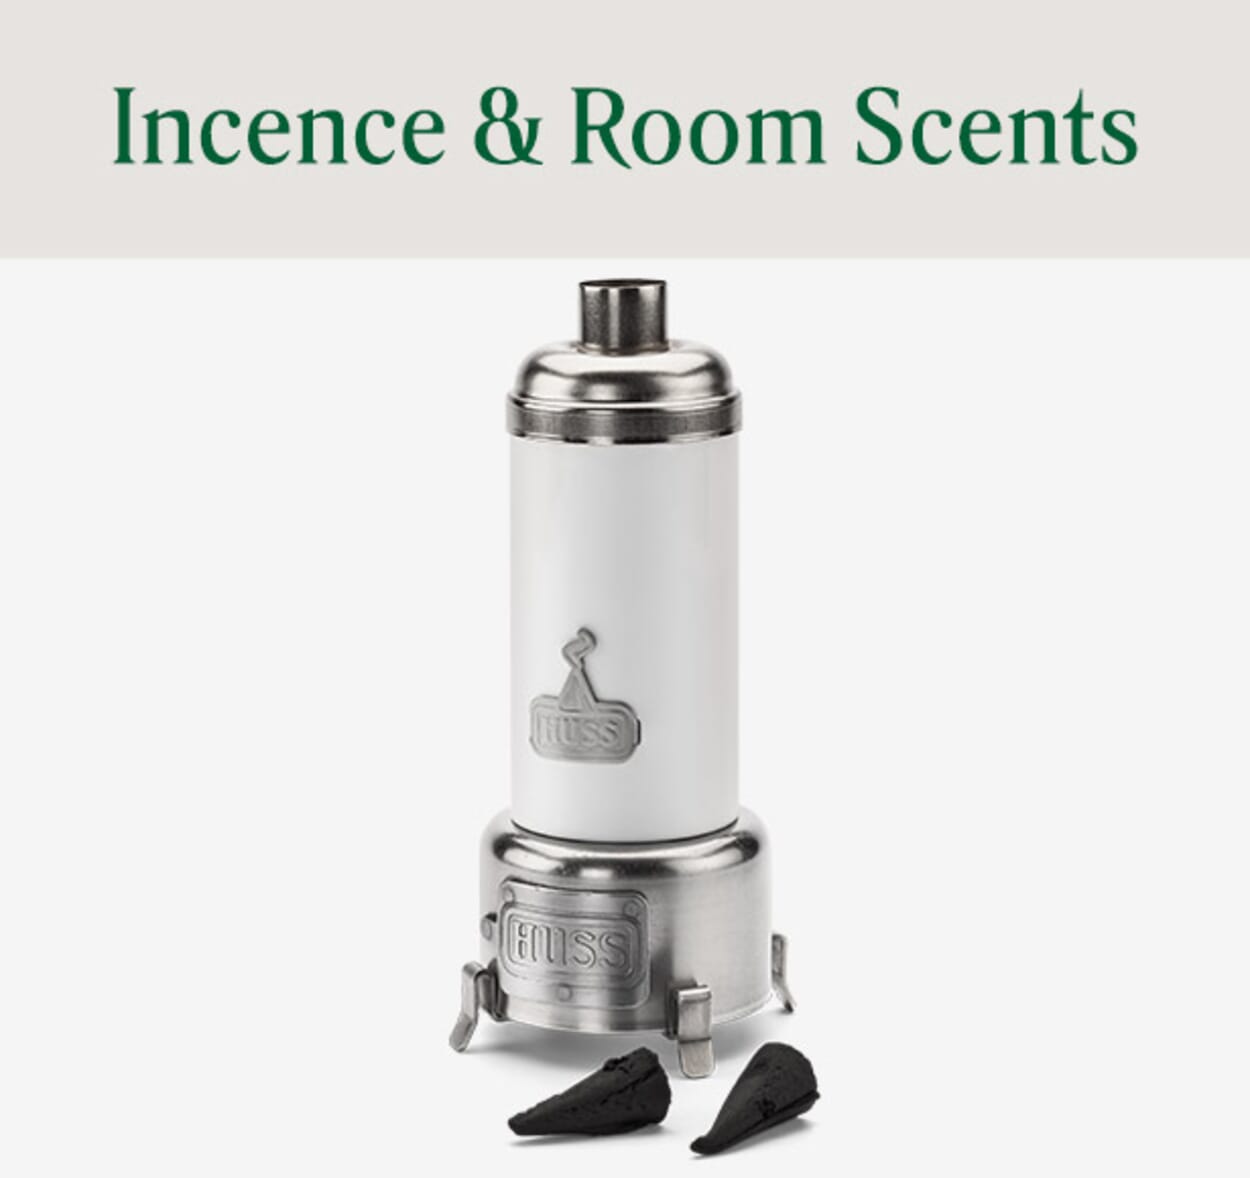 Incence & Room Scents